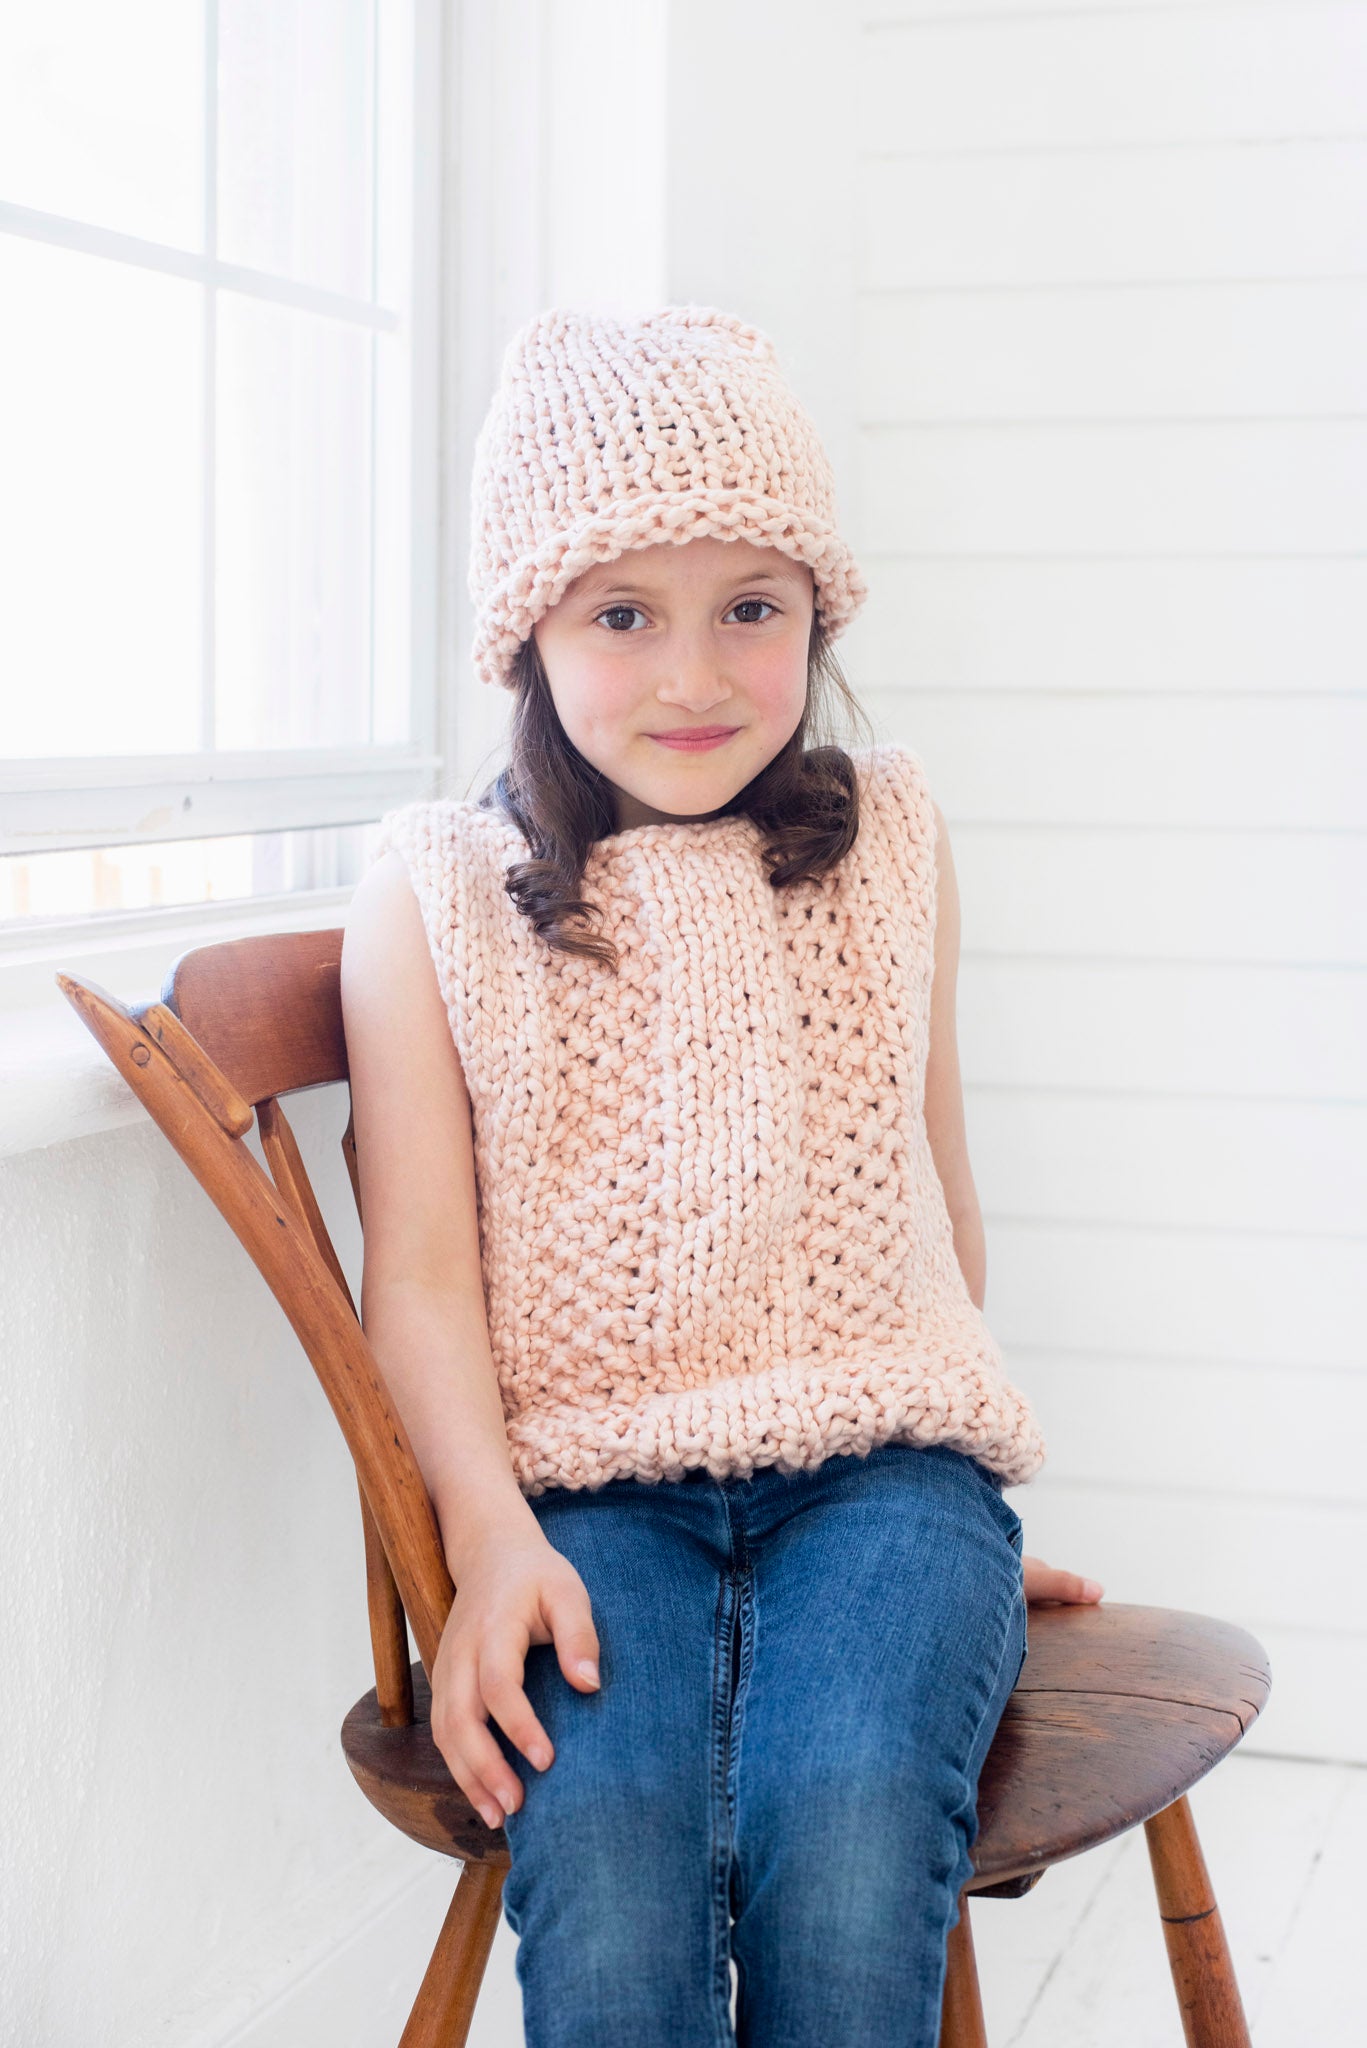 Video Class: How to Knit Always Summer Top Step-by-Step